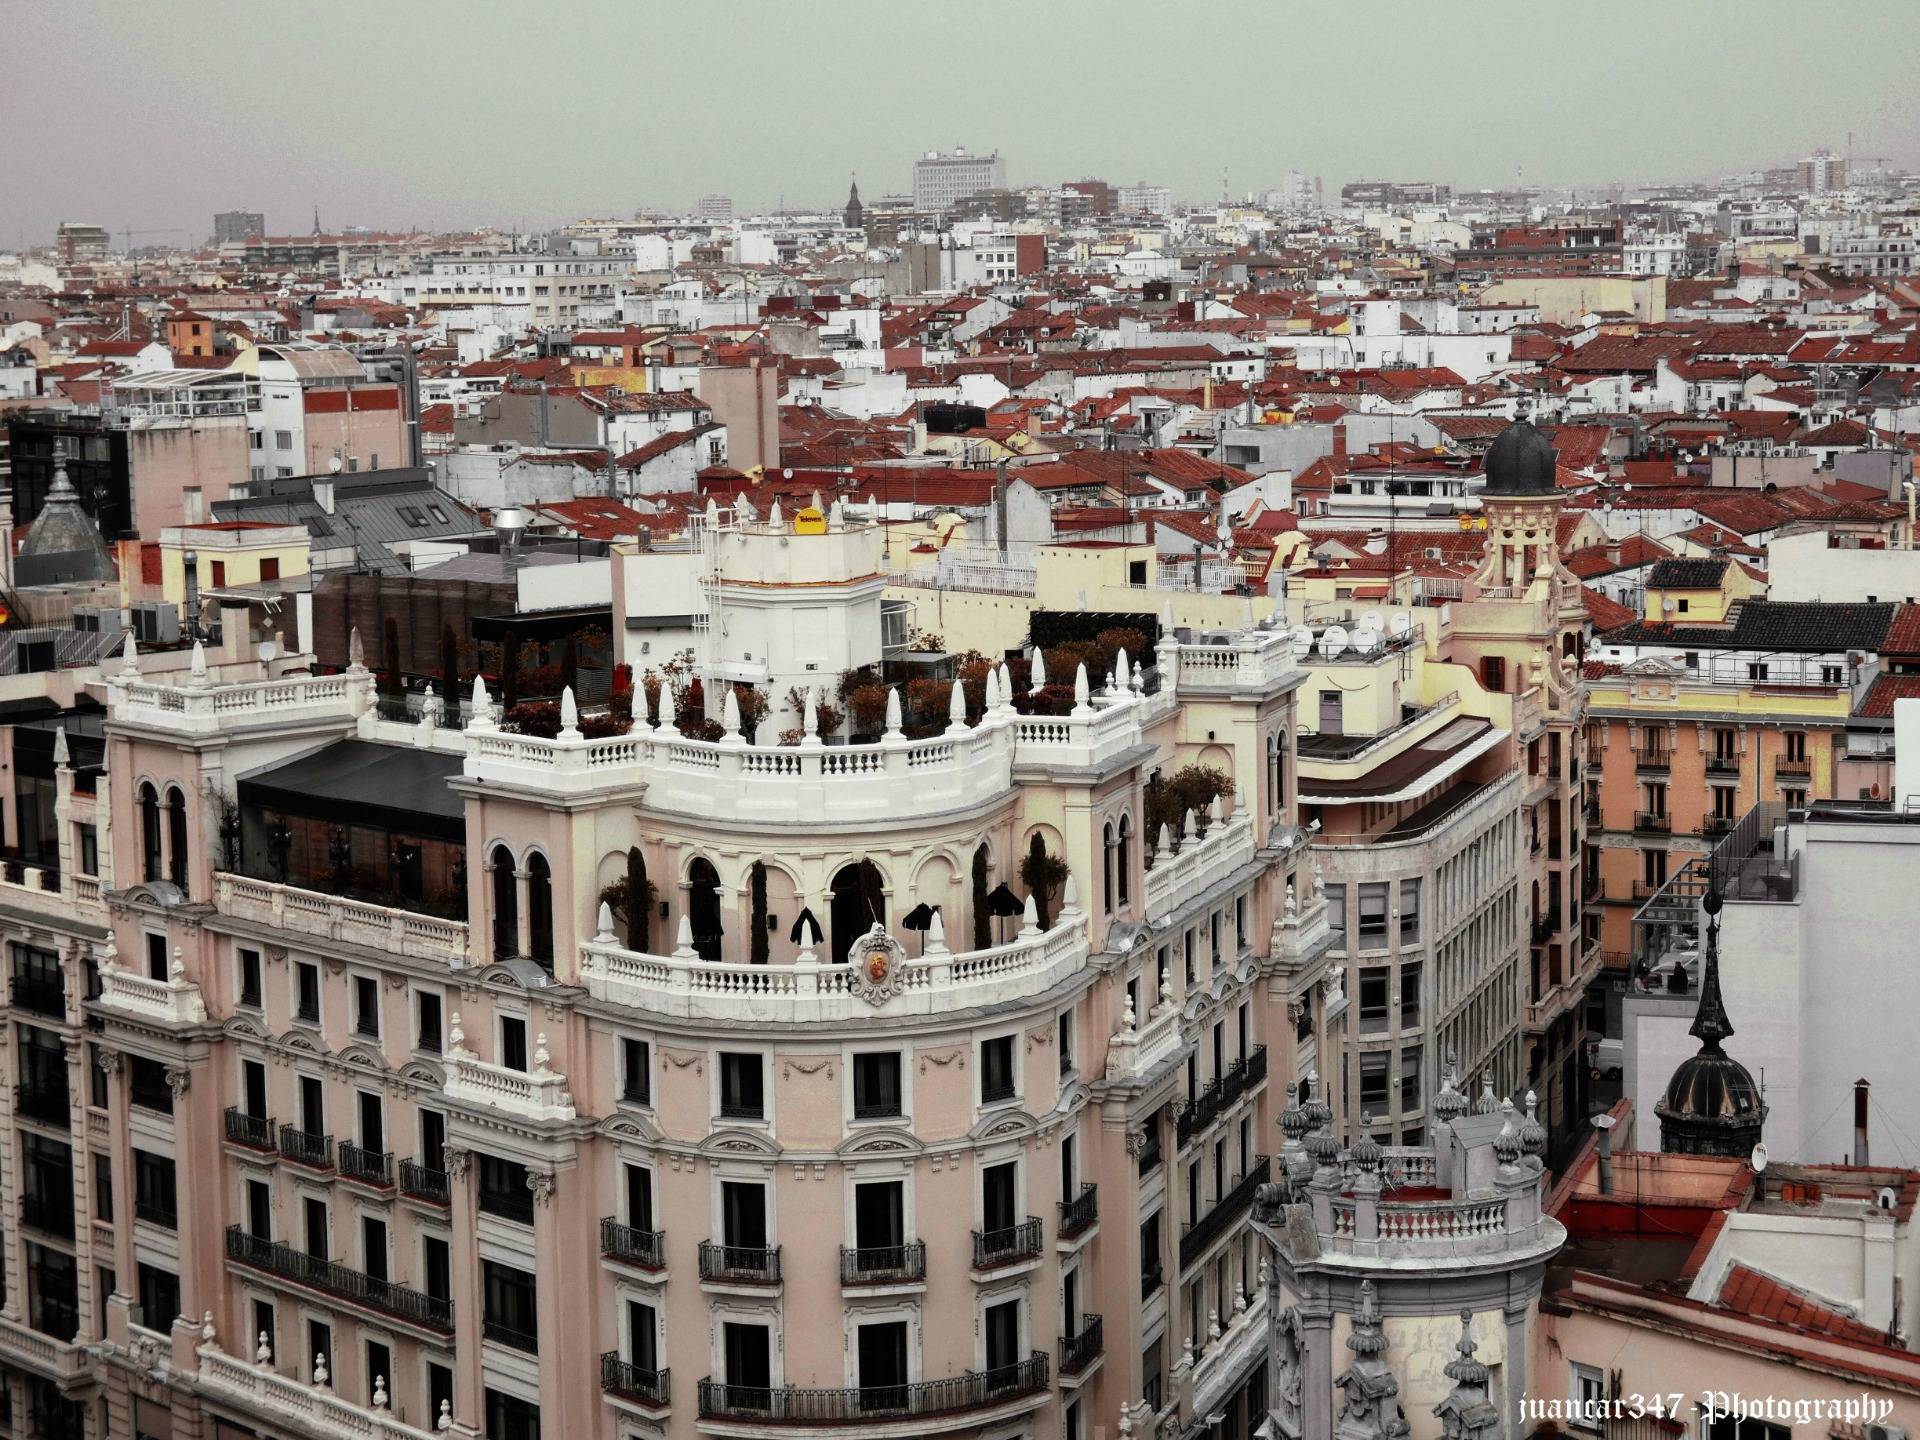 From Madrid to Heaven: the terrace of the Círculo de Bellas Artes